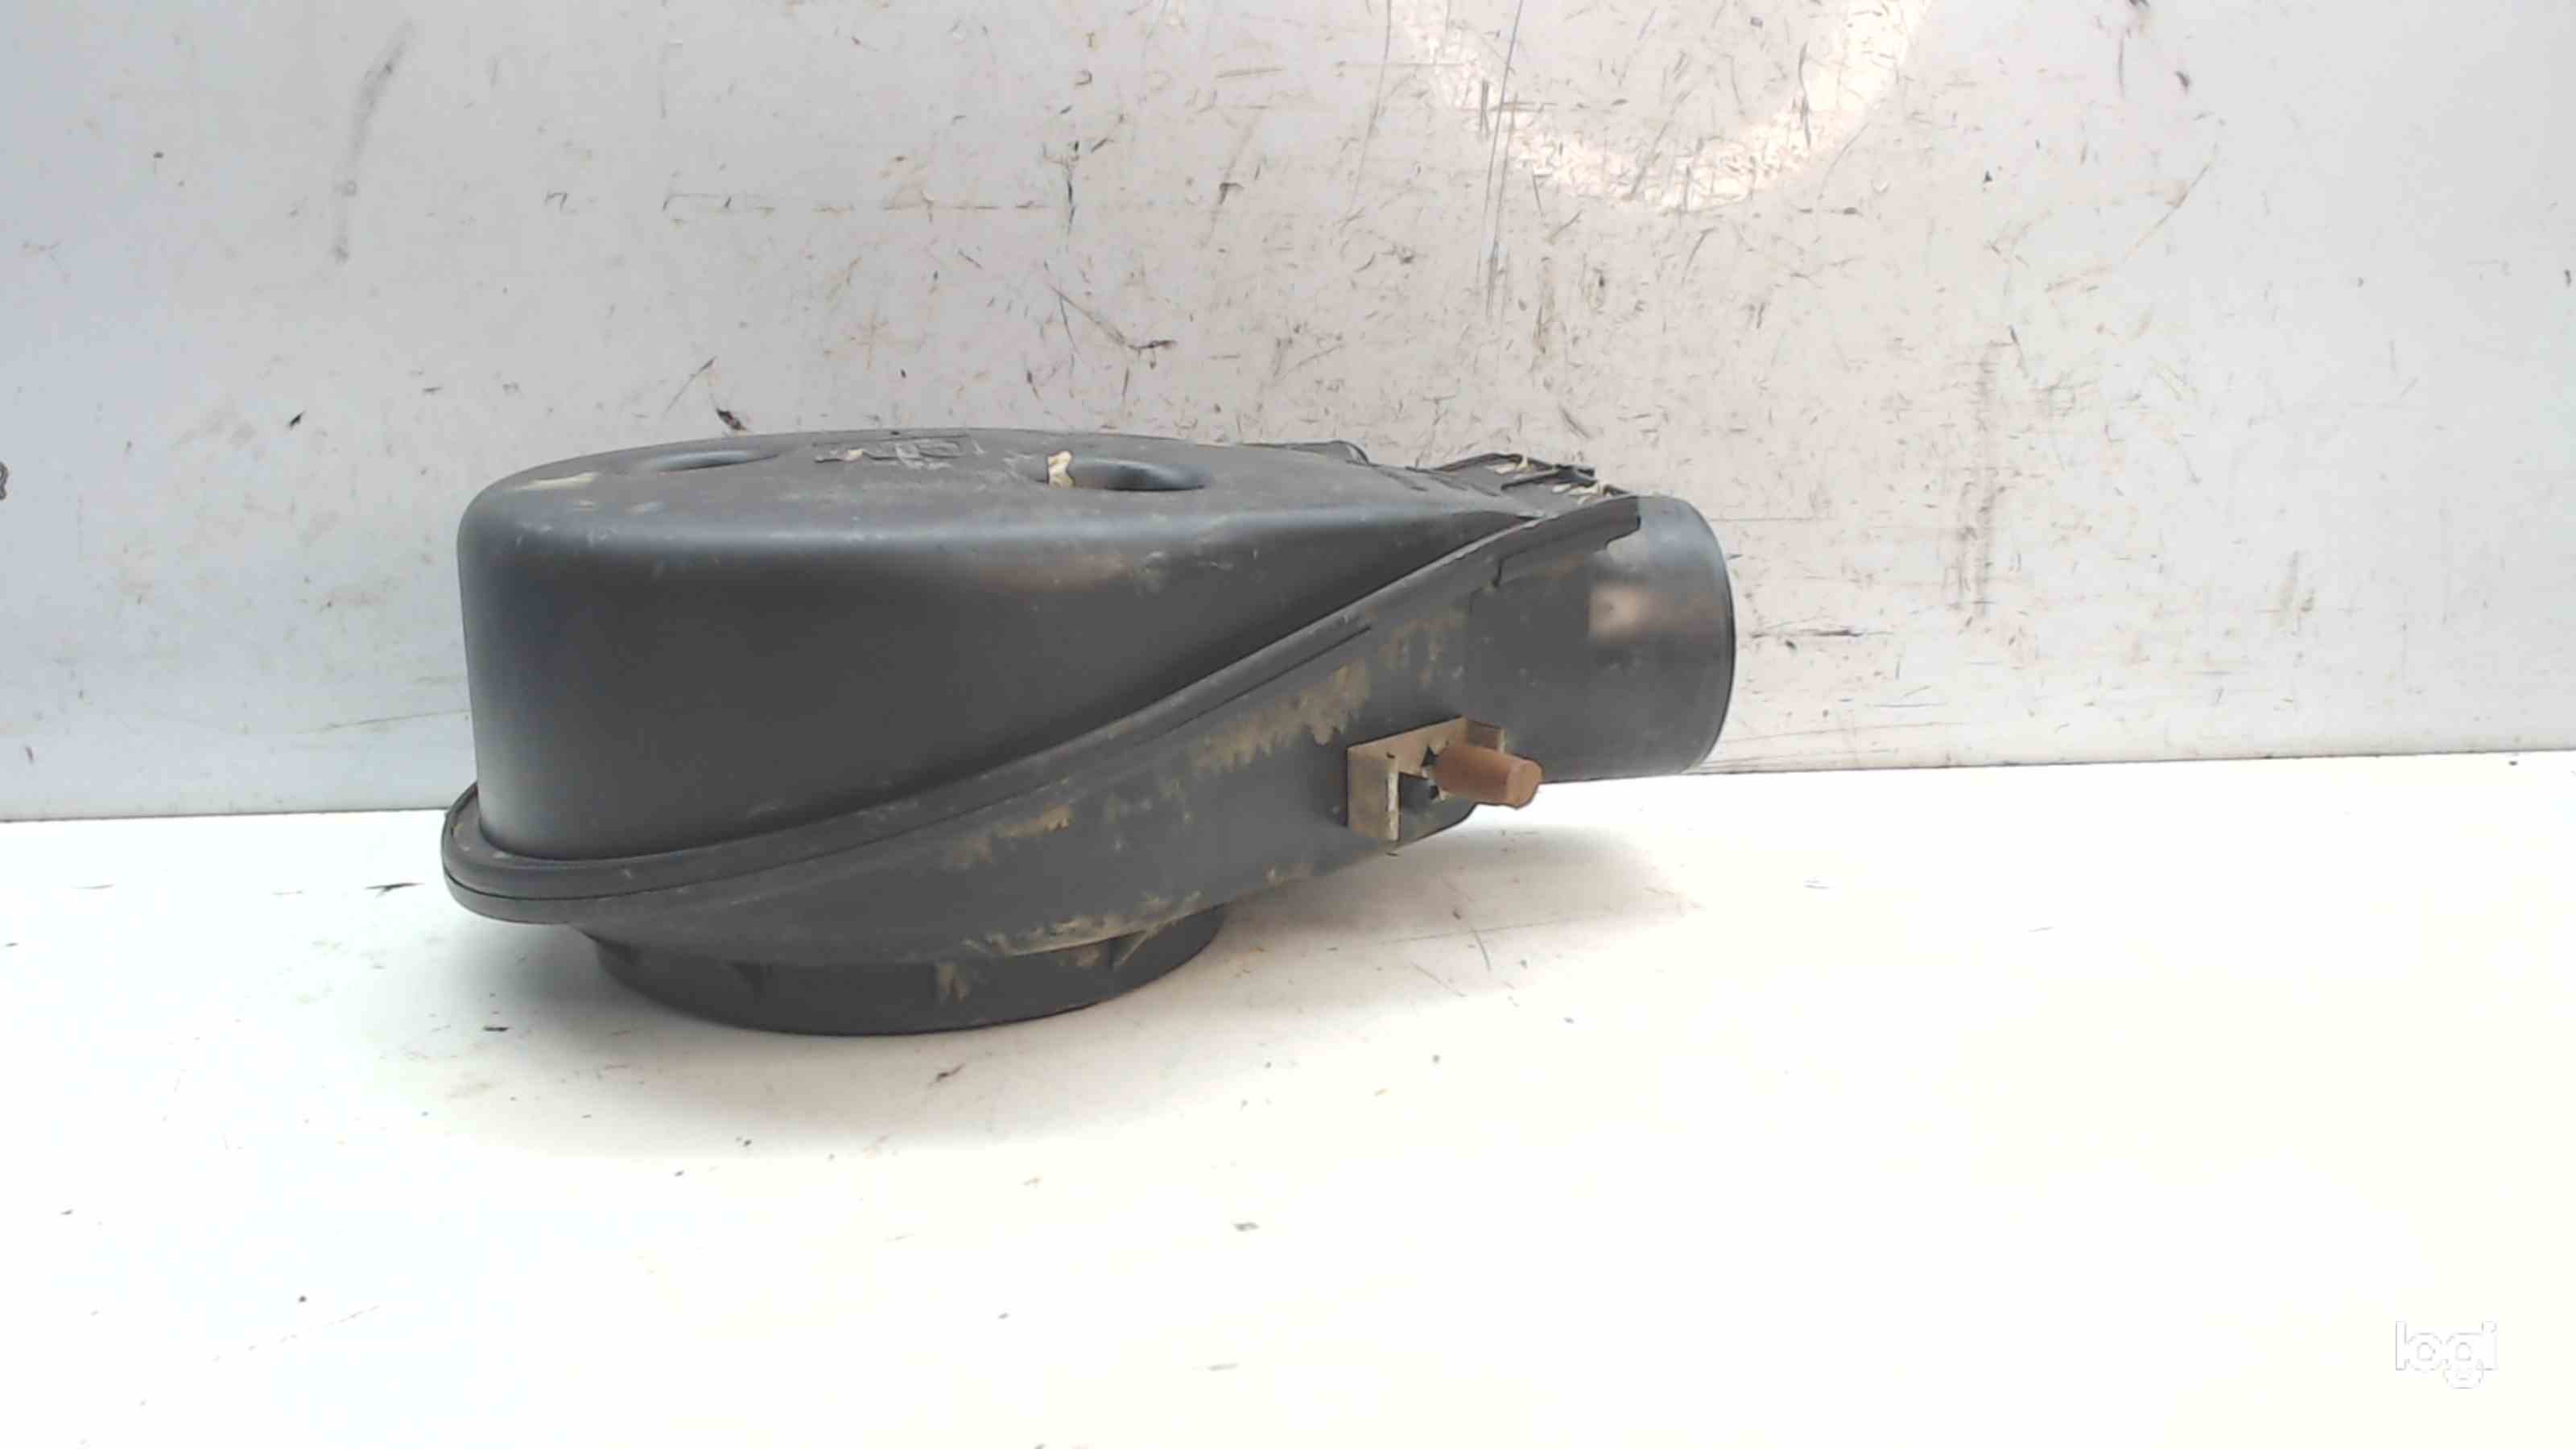 OPEL Corsa B (1993-2000) Other Engine Compartment Parts 90324005 24687100